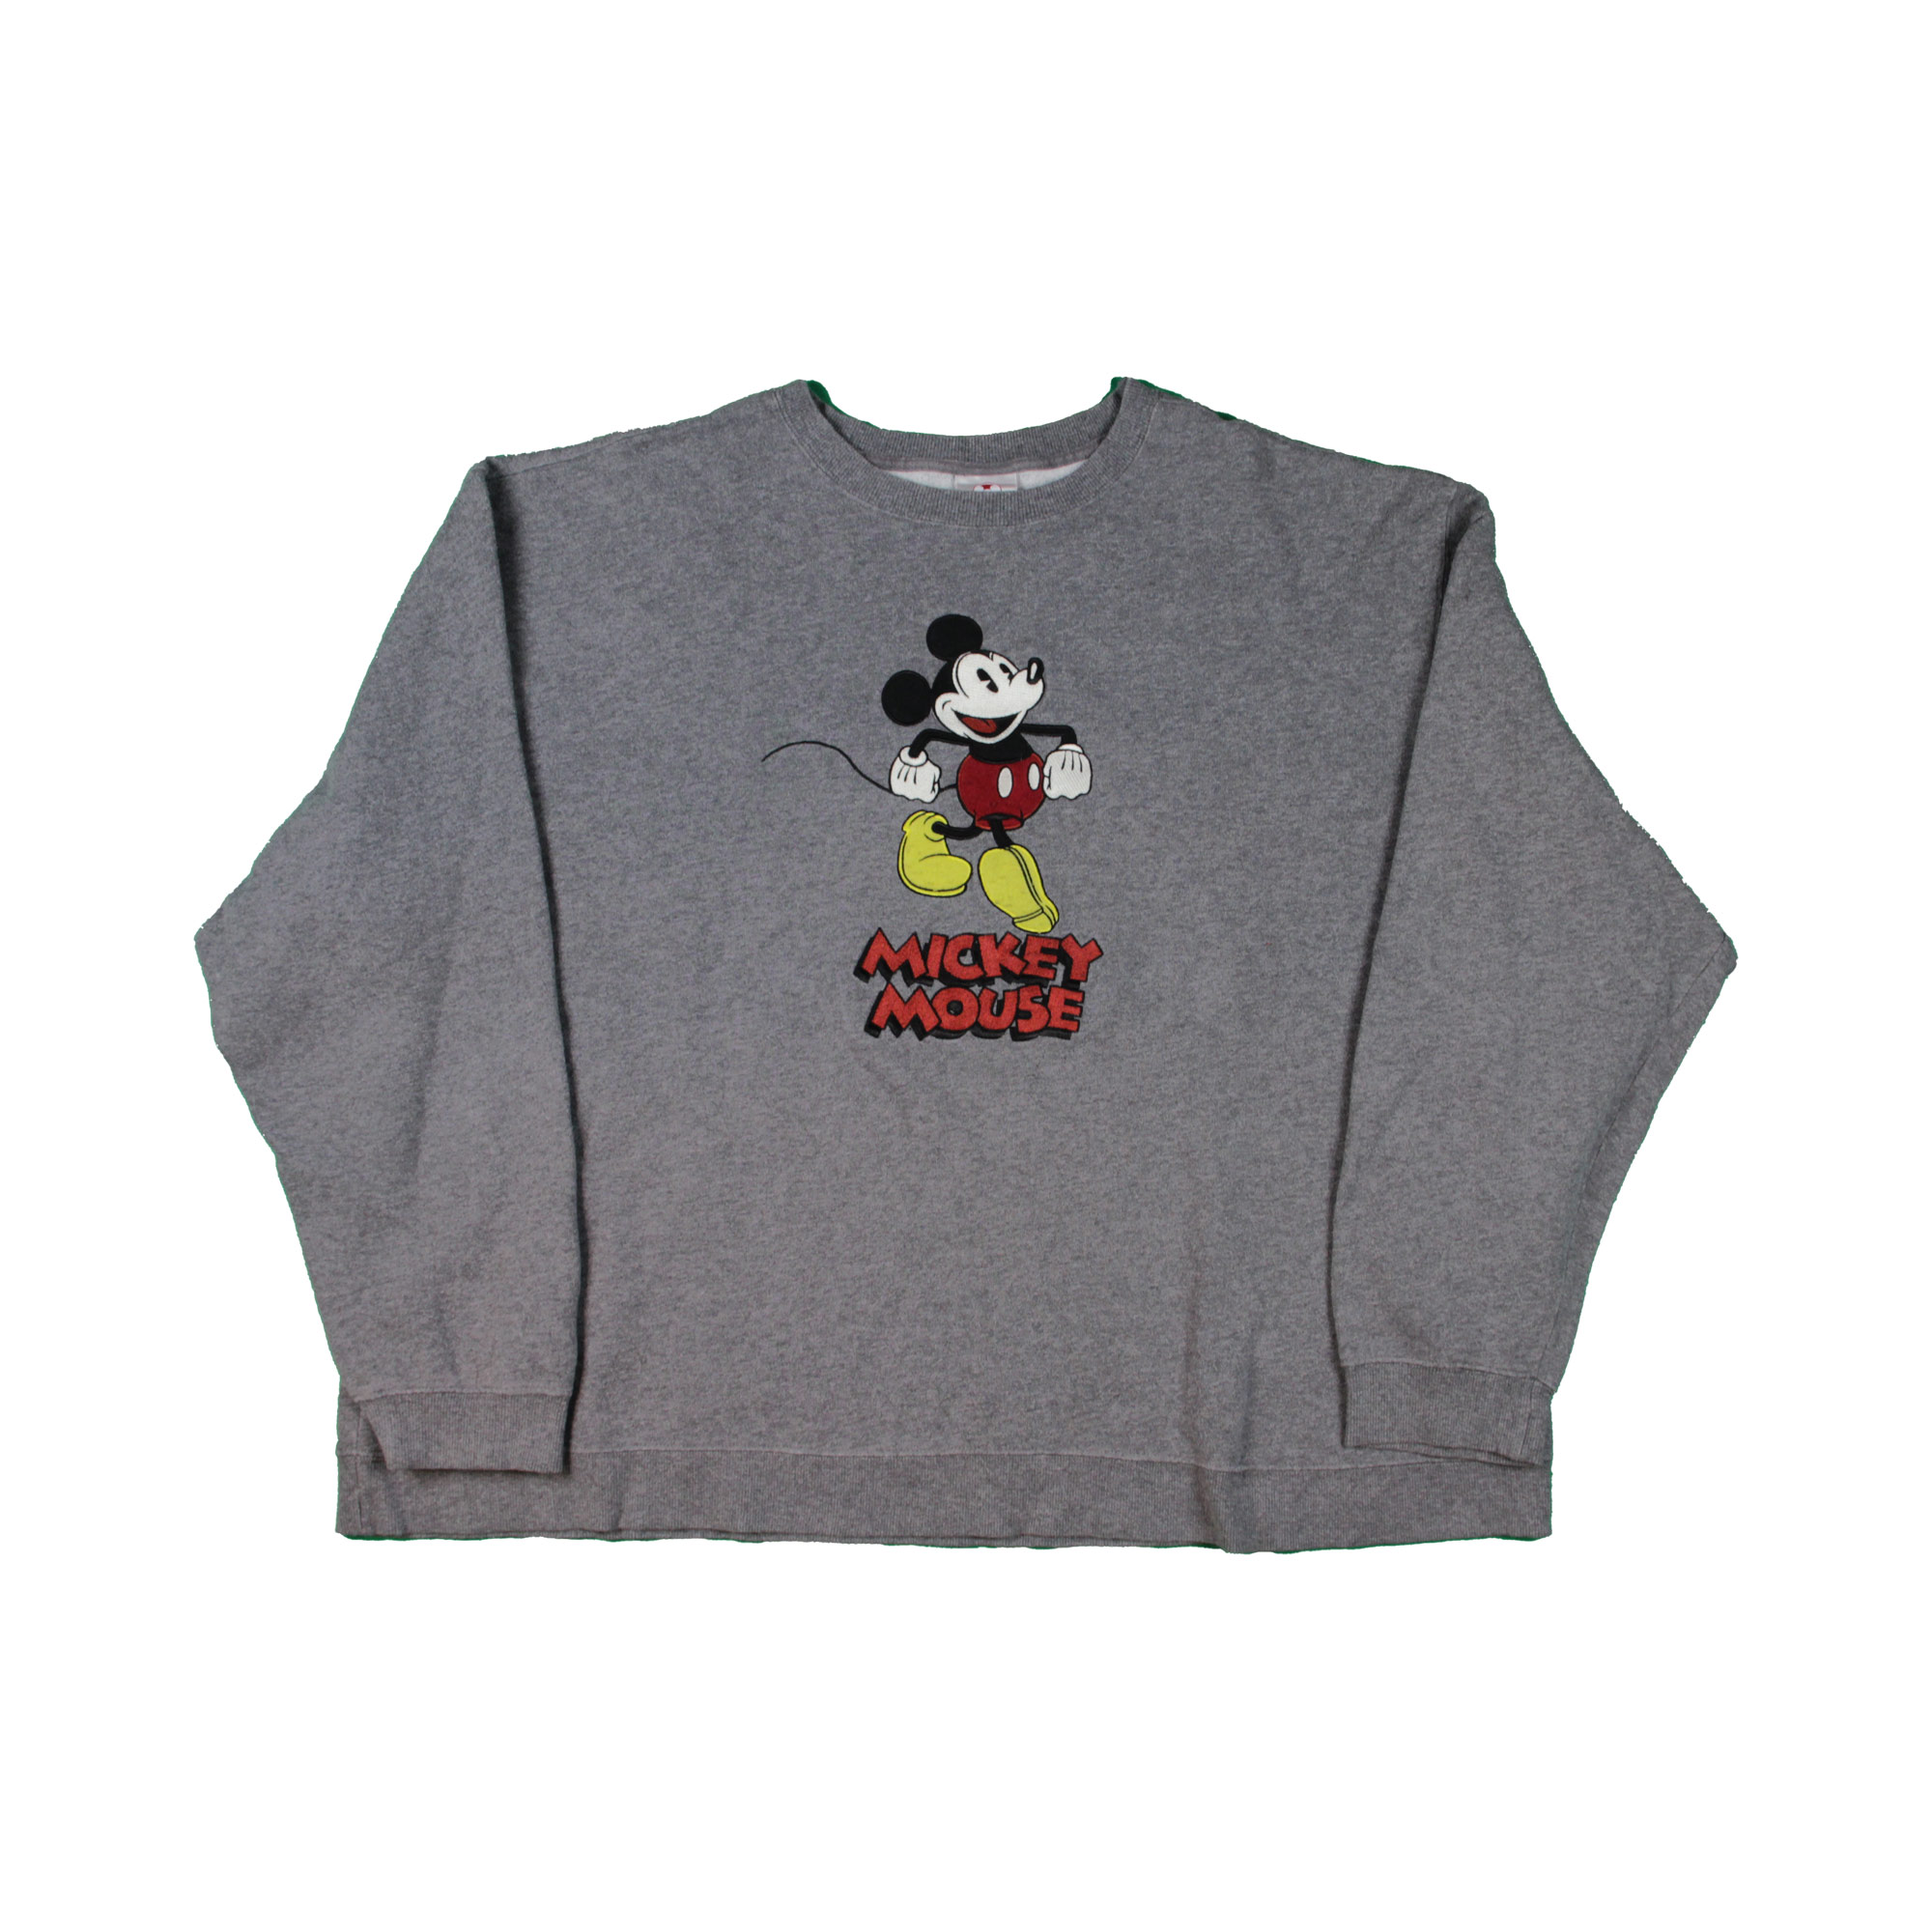 Mickey Mouse Embroidered Sweatshirt - XL